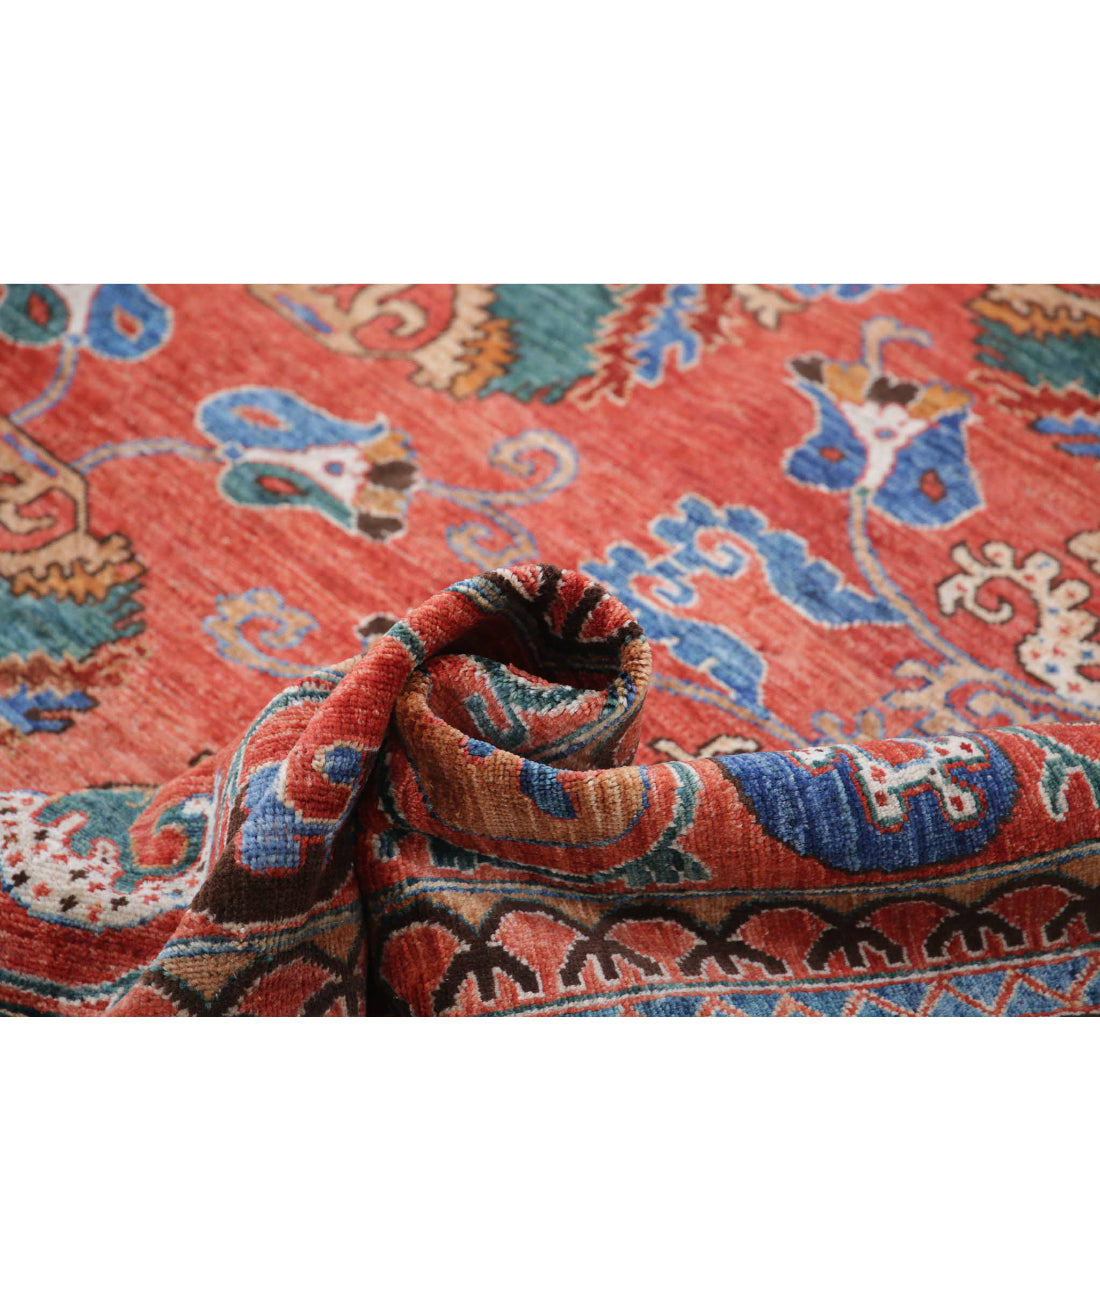 Hand Knotted Nomadic Caucasian Humna Wool Rug - 8'7'' x 9'9'' 8'7'' x 9'9'' (258 X 293) / Red / Blue